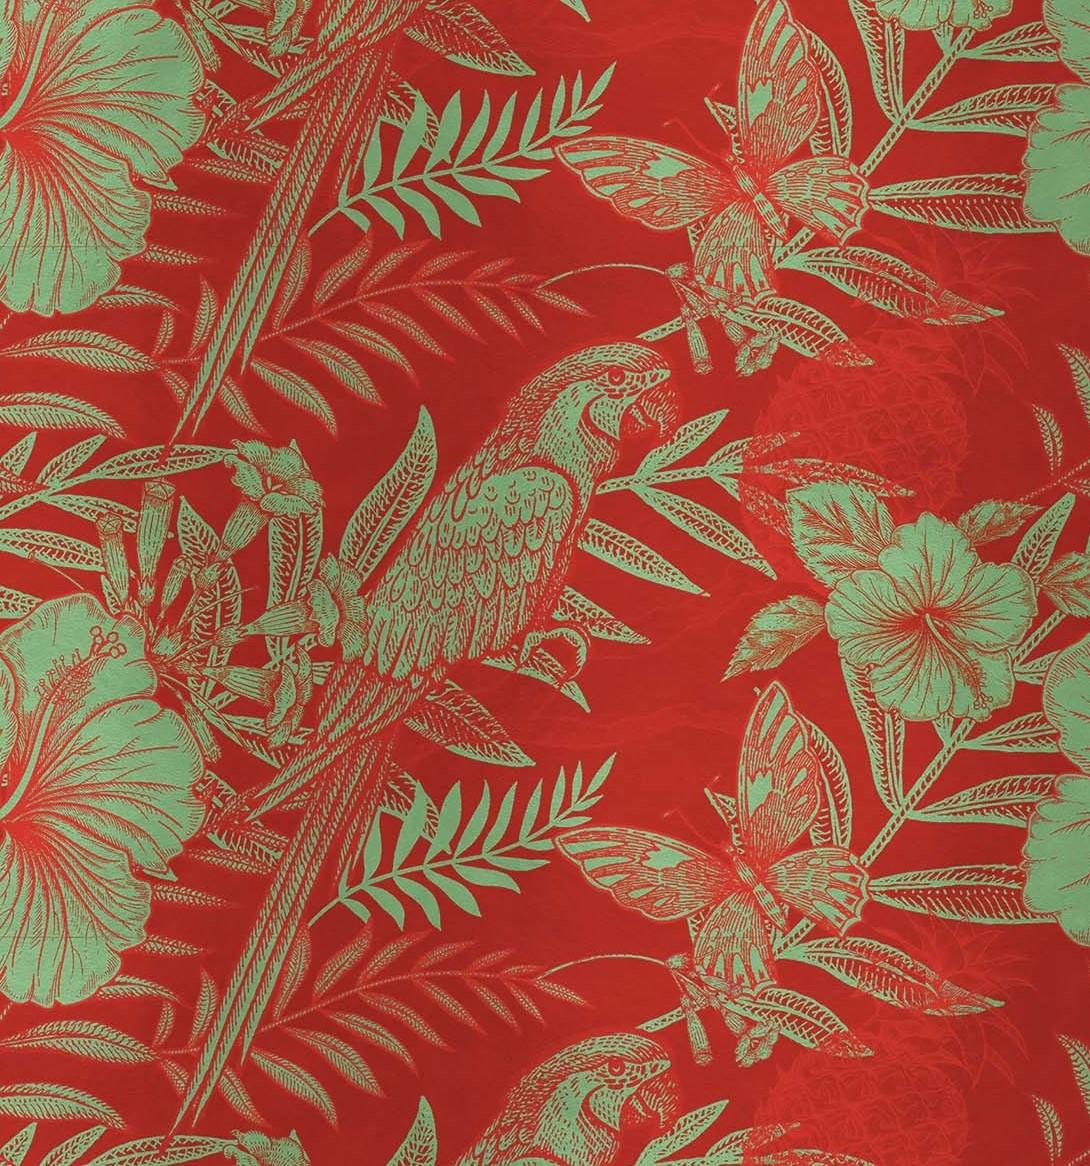 Elegant parrots, flying butterflies and blooming hibiscus flowers are stand out over a vivid red background in this dramatic and sophisticated wall covering. Making a statement in any room in the house, its silk and cotton surface can come as